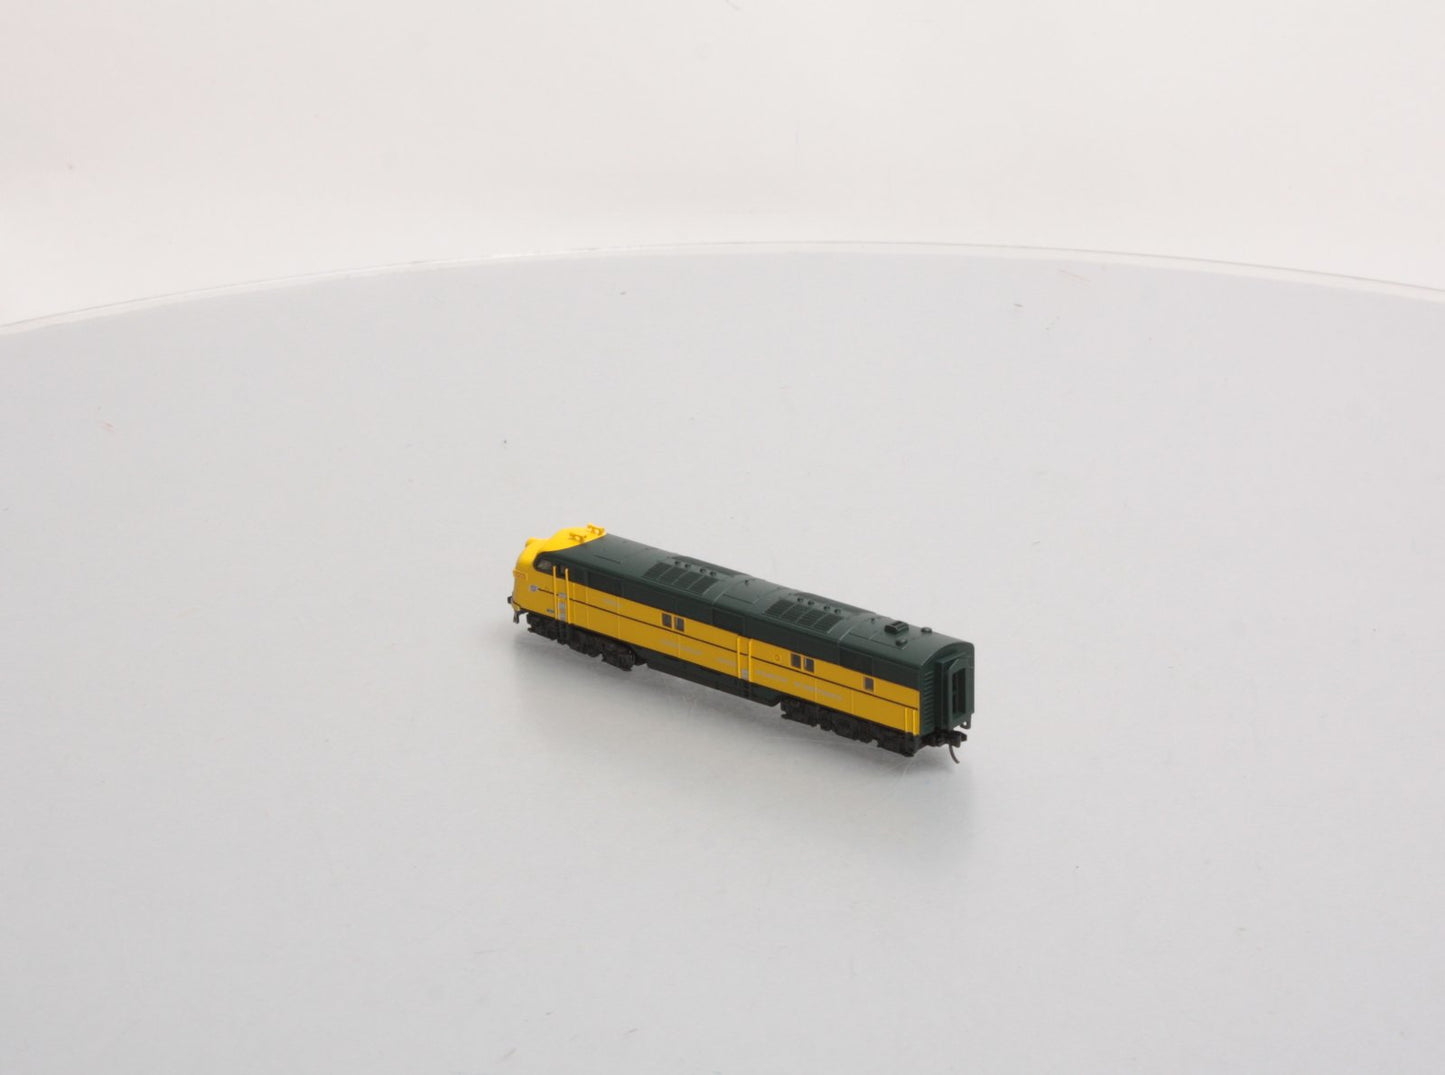 Broadway Limited EMD E7A C&NW #5008A Powered Diesel Loco